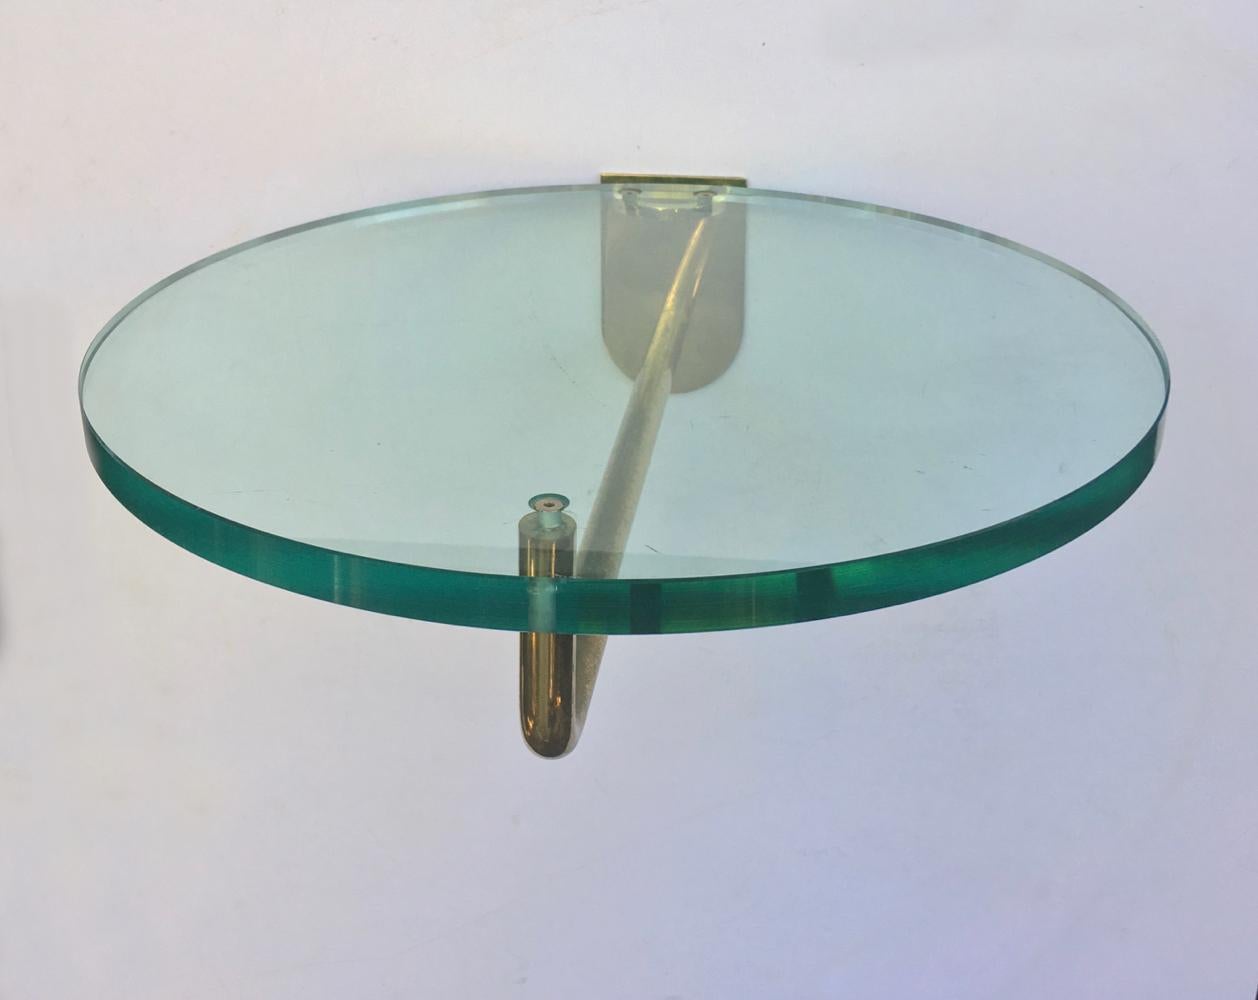 A pair of circular glass and brass shelves, for display or storage, second half of the 20th century, unsigned.

The shelves were found in Europe, and were perhaps used for shop display, as both have an aged patina and signs of use including